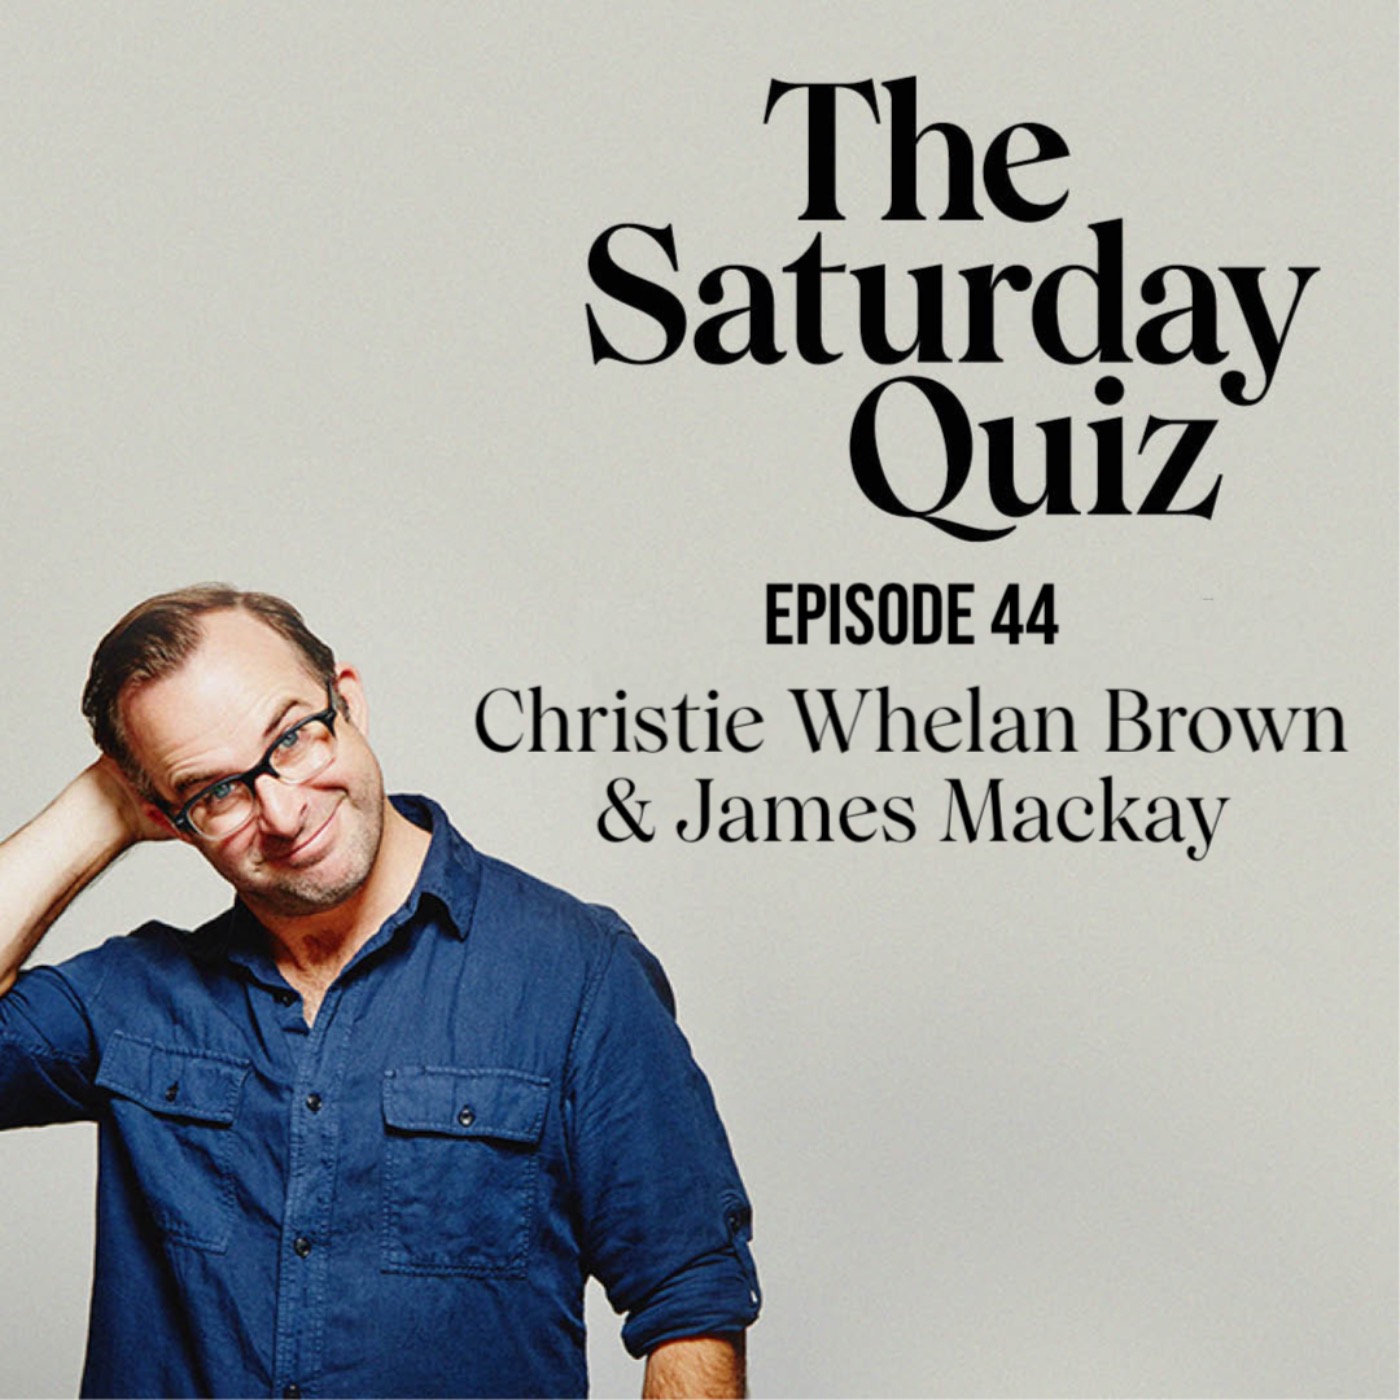 As You Quiz It with Christie Whelan Brown and James Mackay